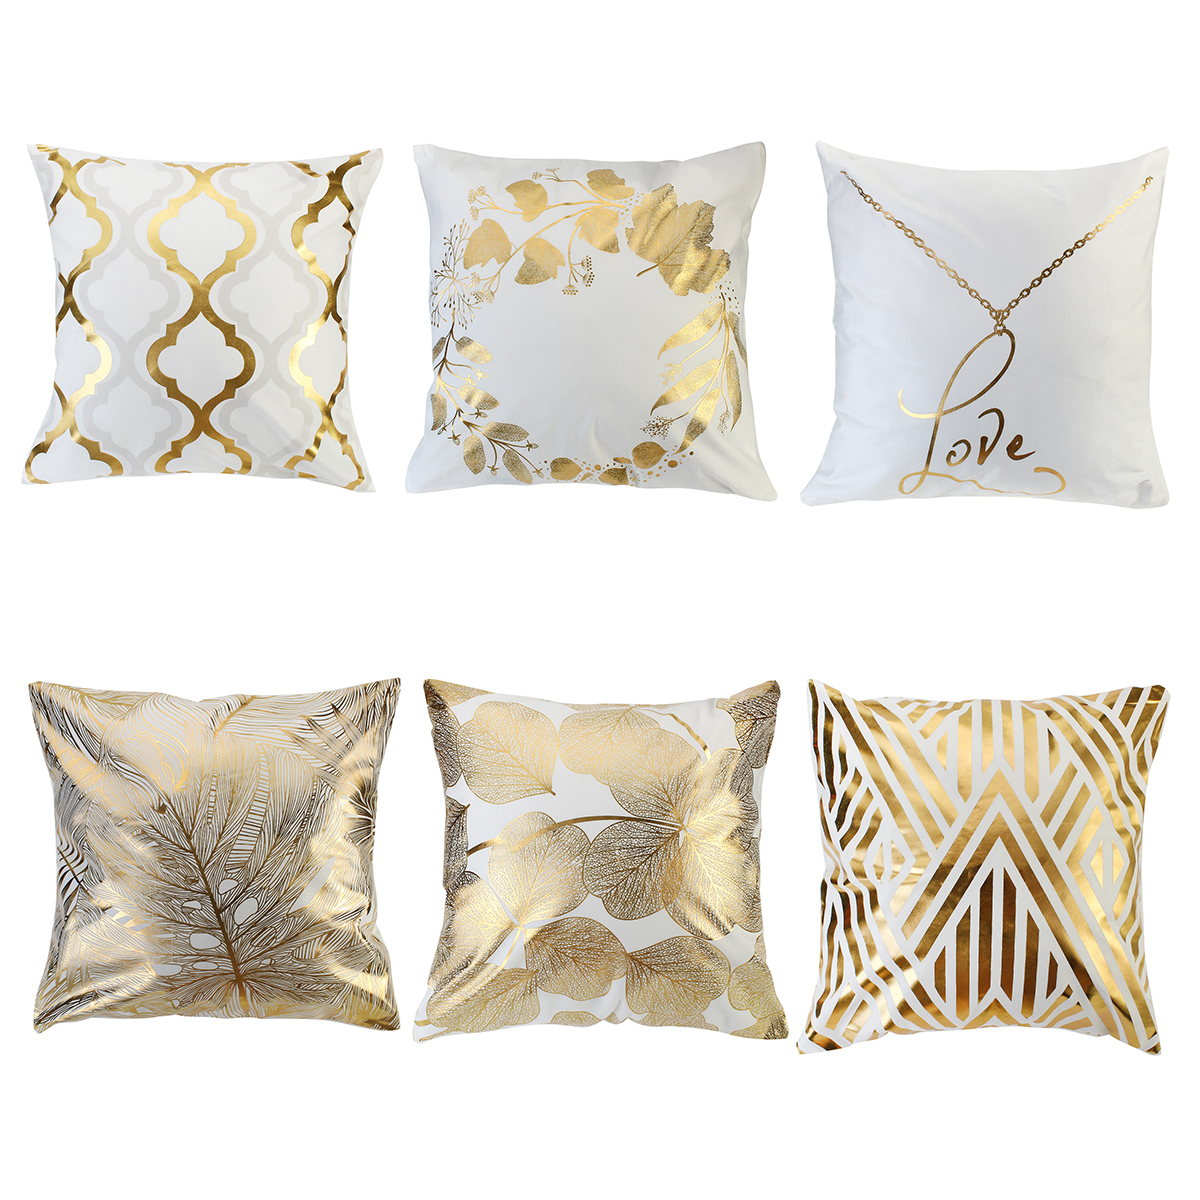 45-x-45cm-Cushion-Gold-Leaves-Geometric-Pattern-Pillow-Cover-Square-Decorative-Pillowcases-For-Decor-1726847-5